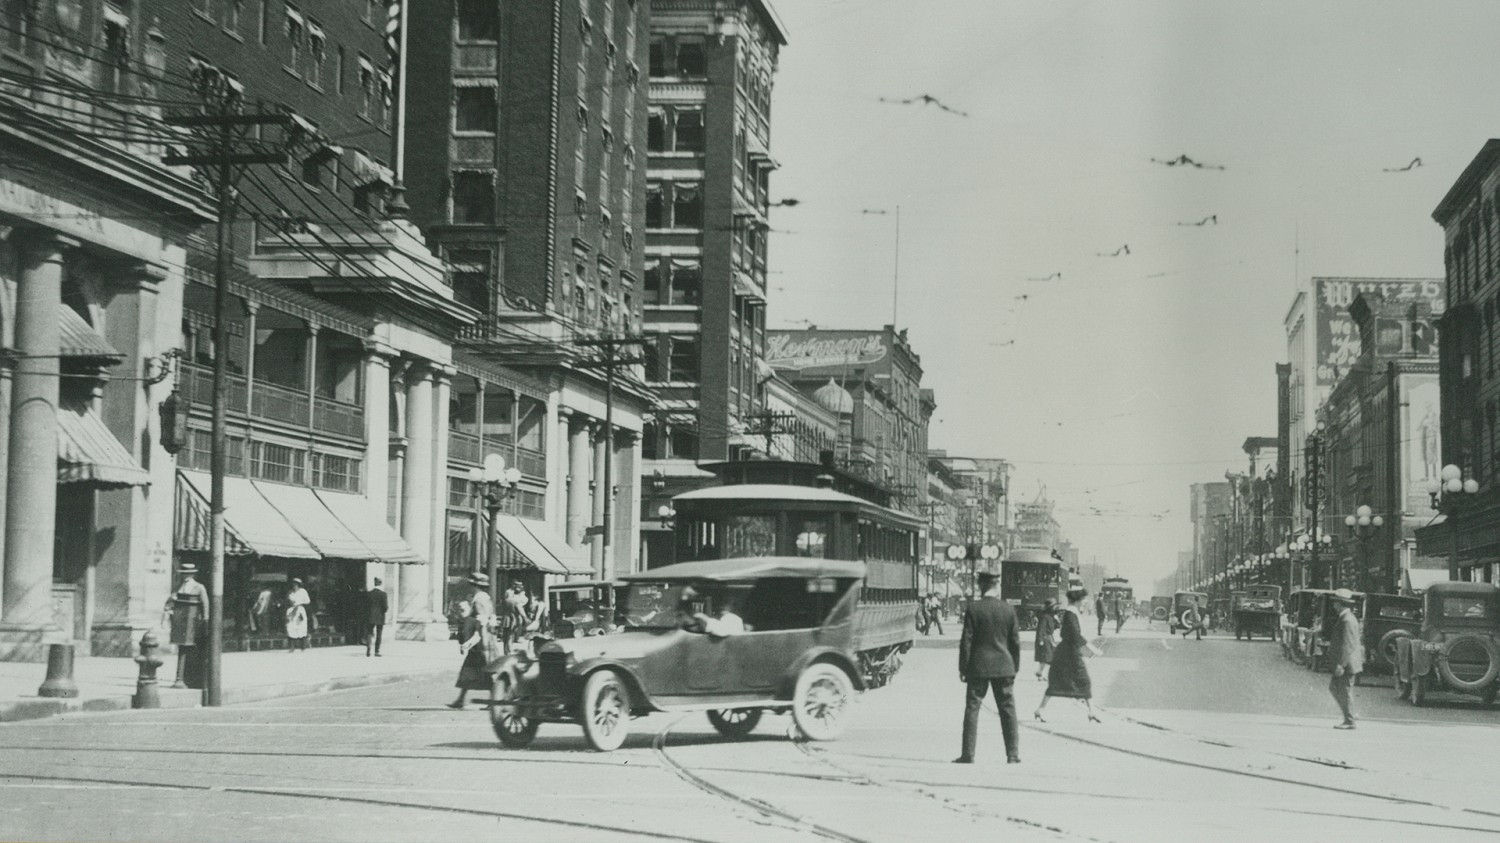 Amway Grand_Historic_Black and White_Exterior_Pantlind Hotel_Historic Cars_People_Bikes_Street